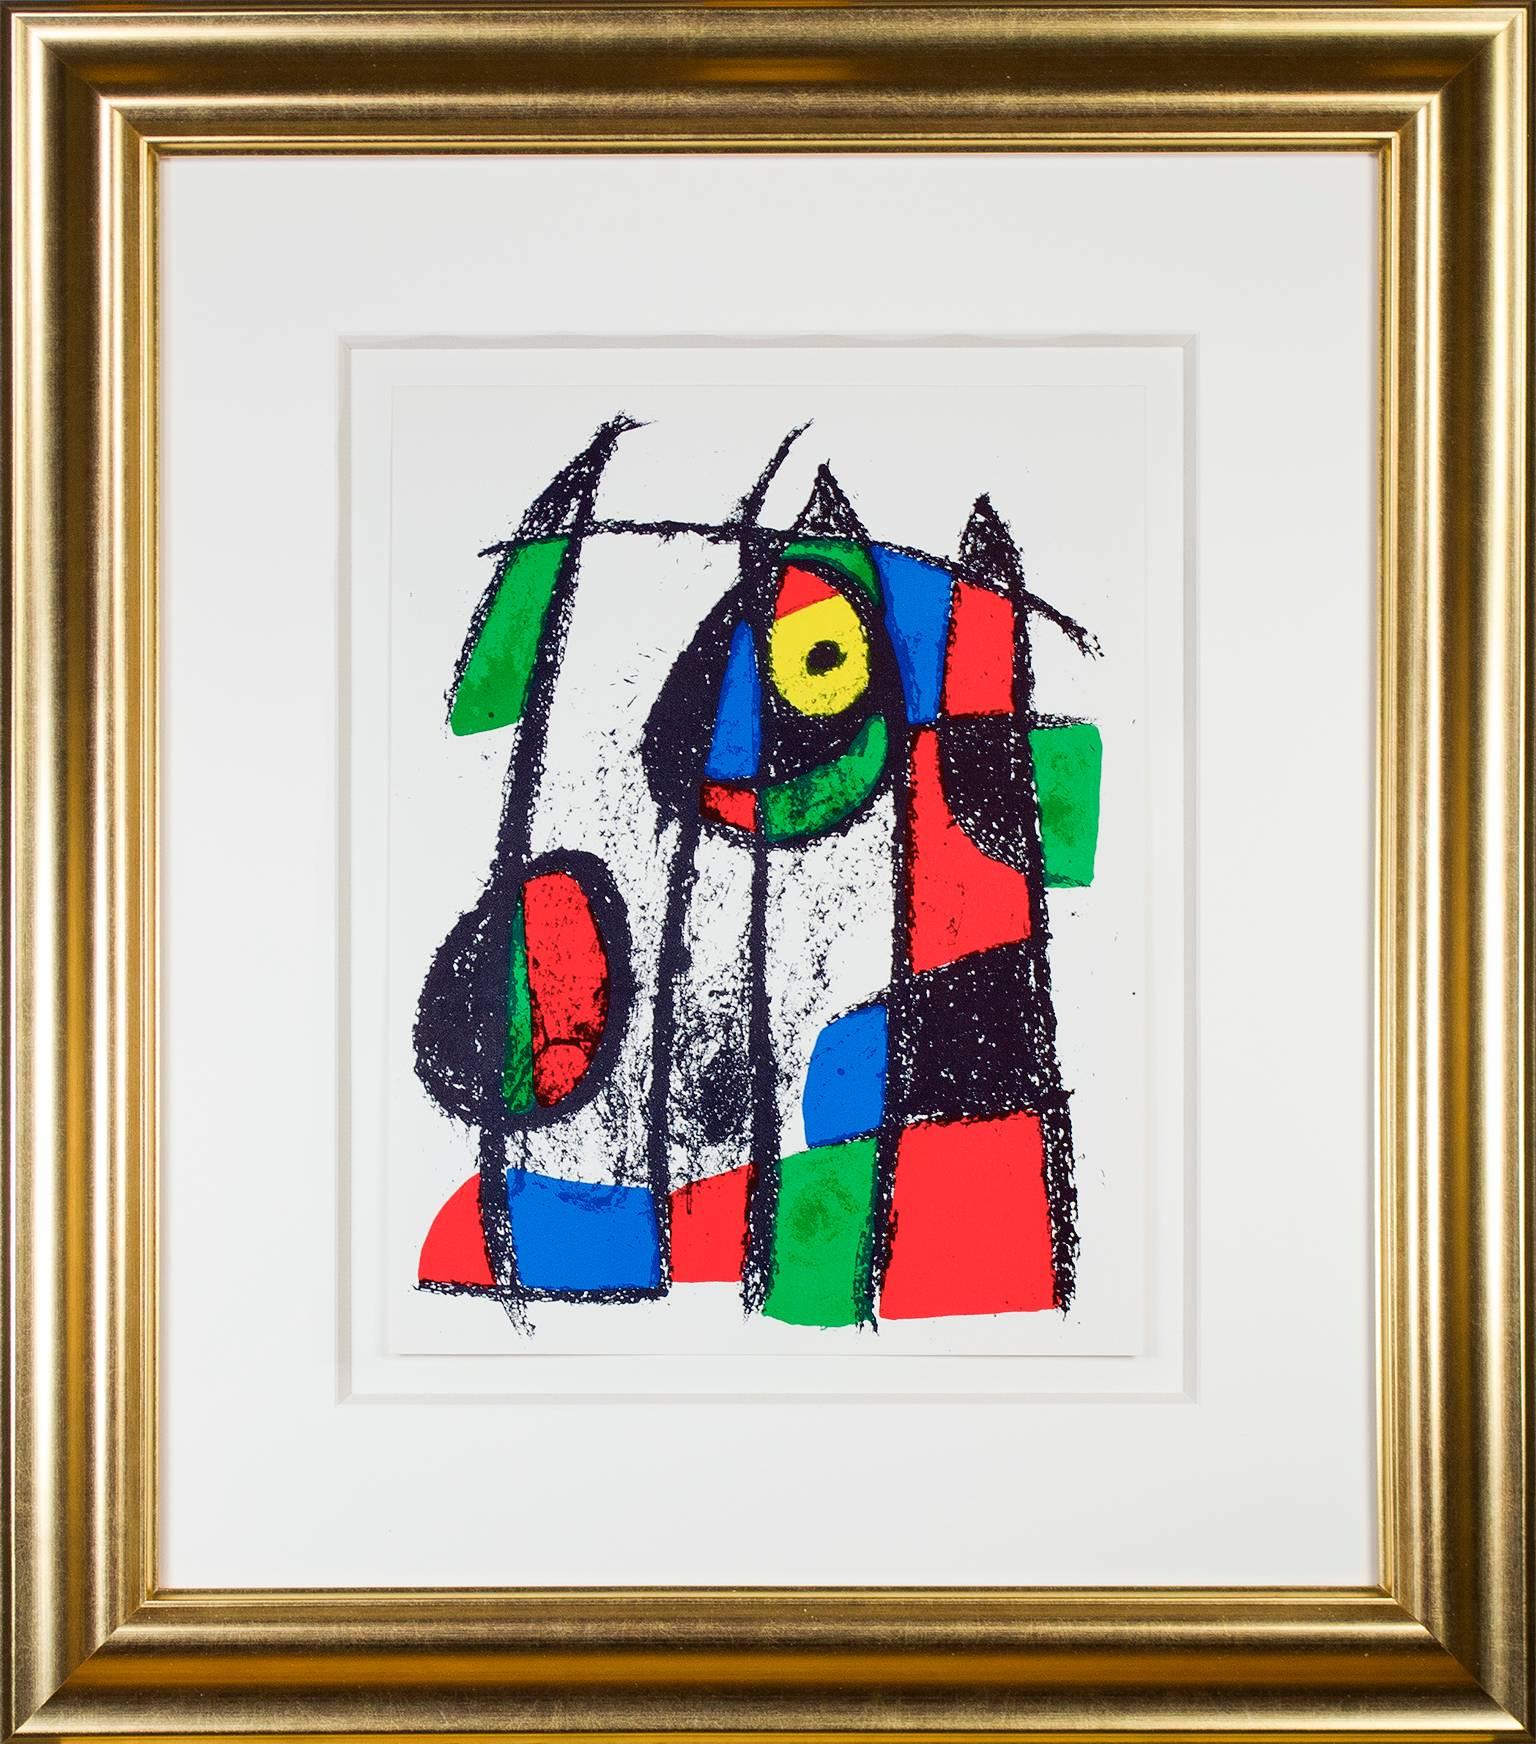 Original Lithograph VII, from Miro Lithographs II, Maeght Publisher - Blue Abstract Print by Joan Miró